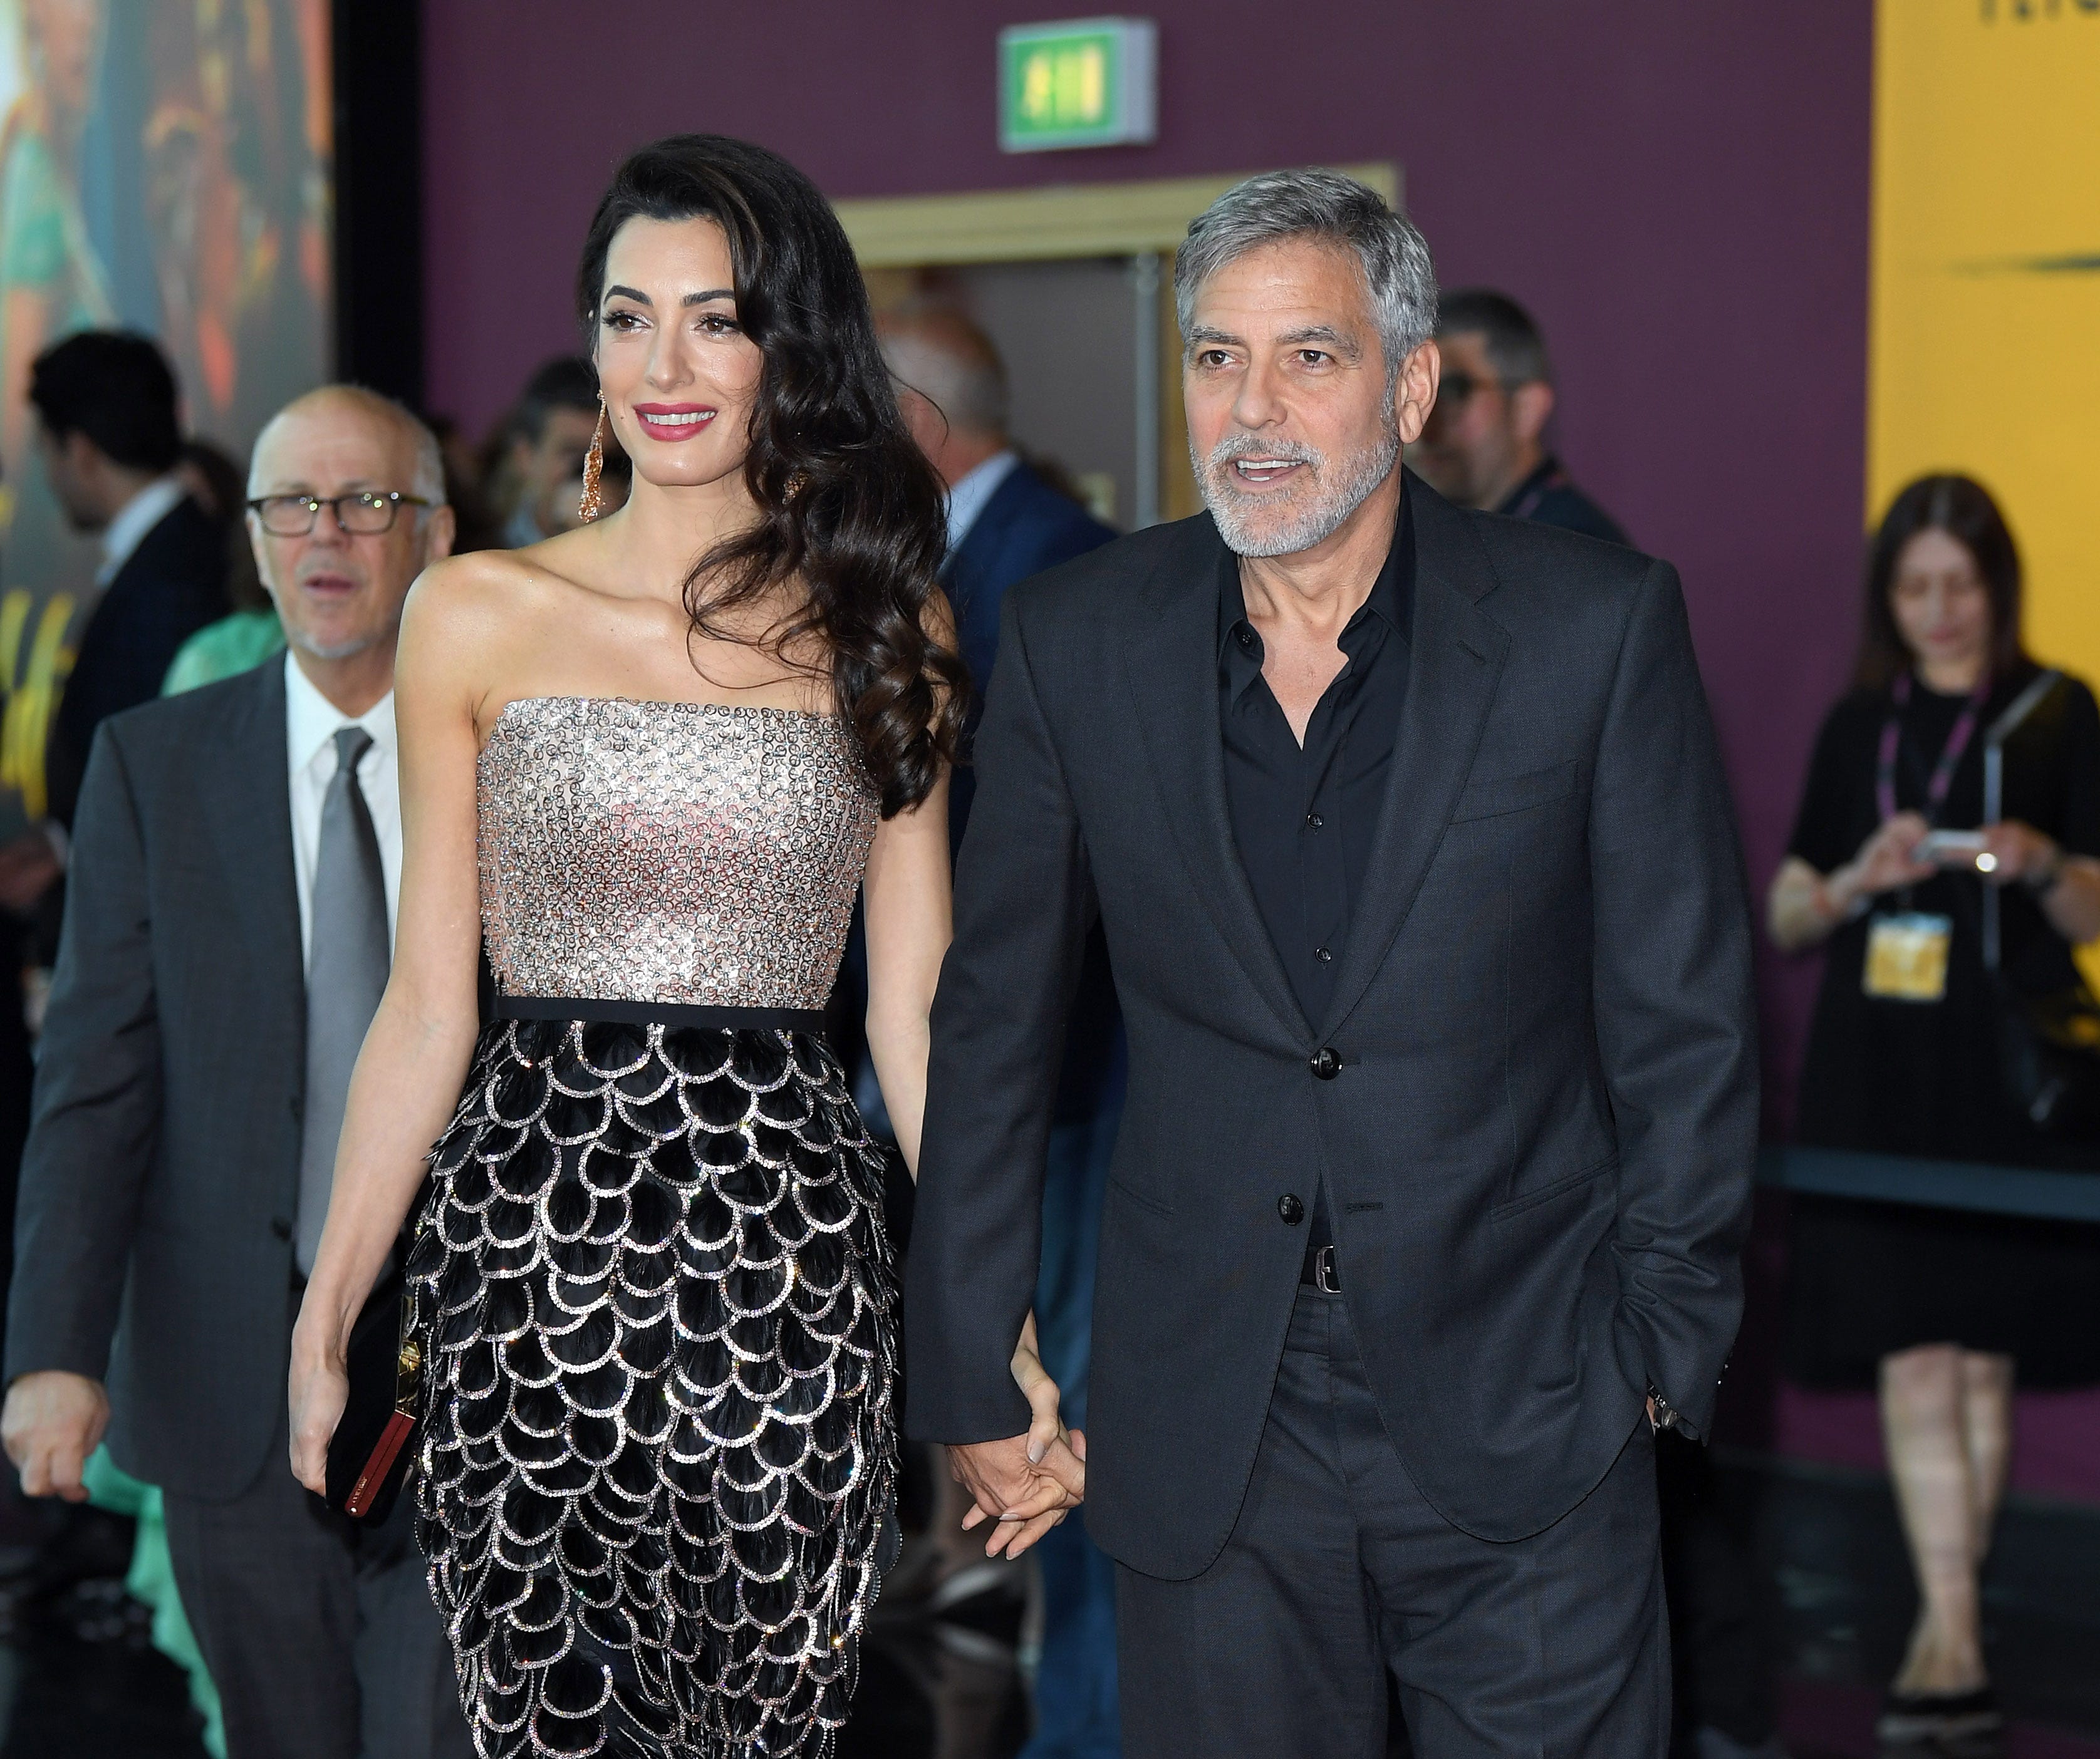 George Clooney Proposed To Wife Amal Out Of The Blue